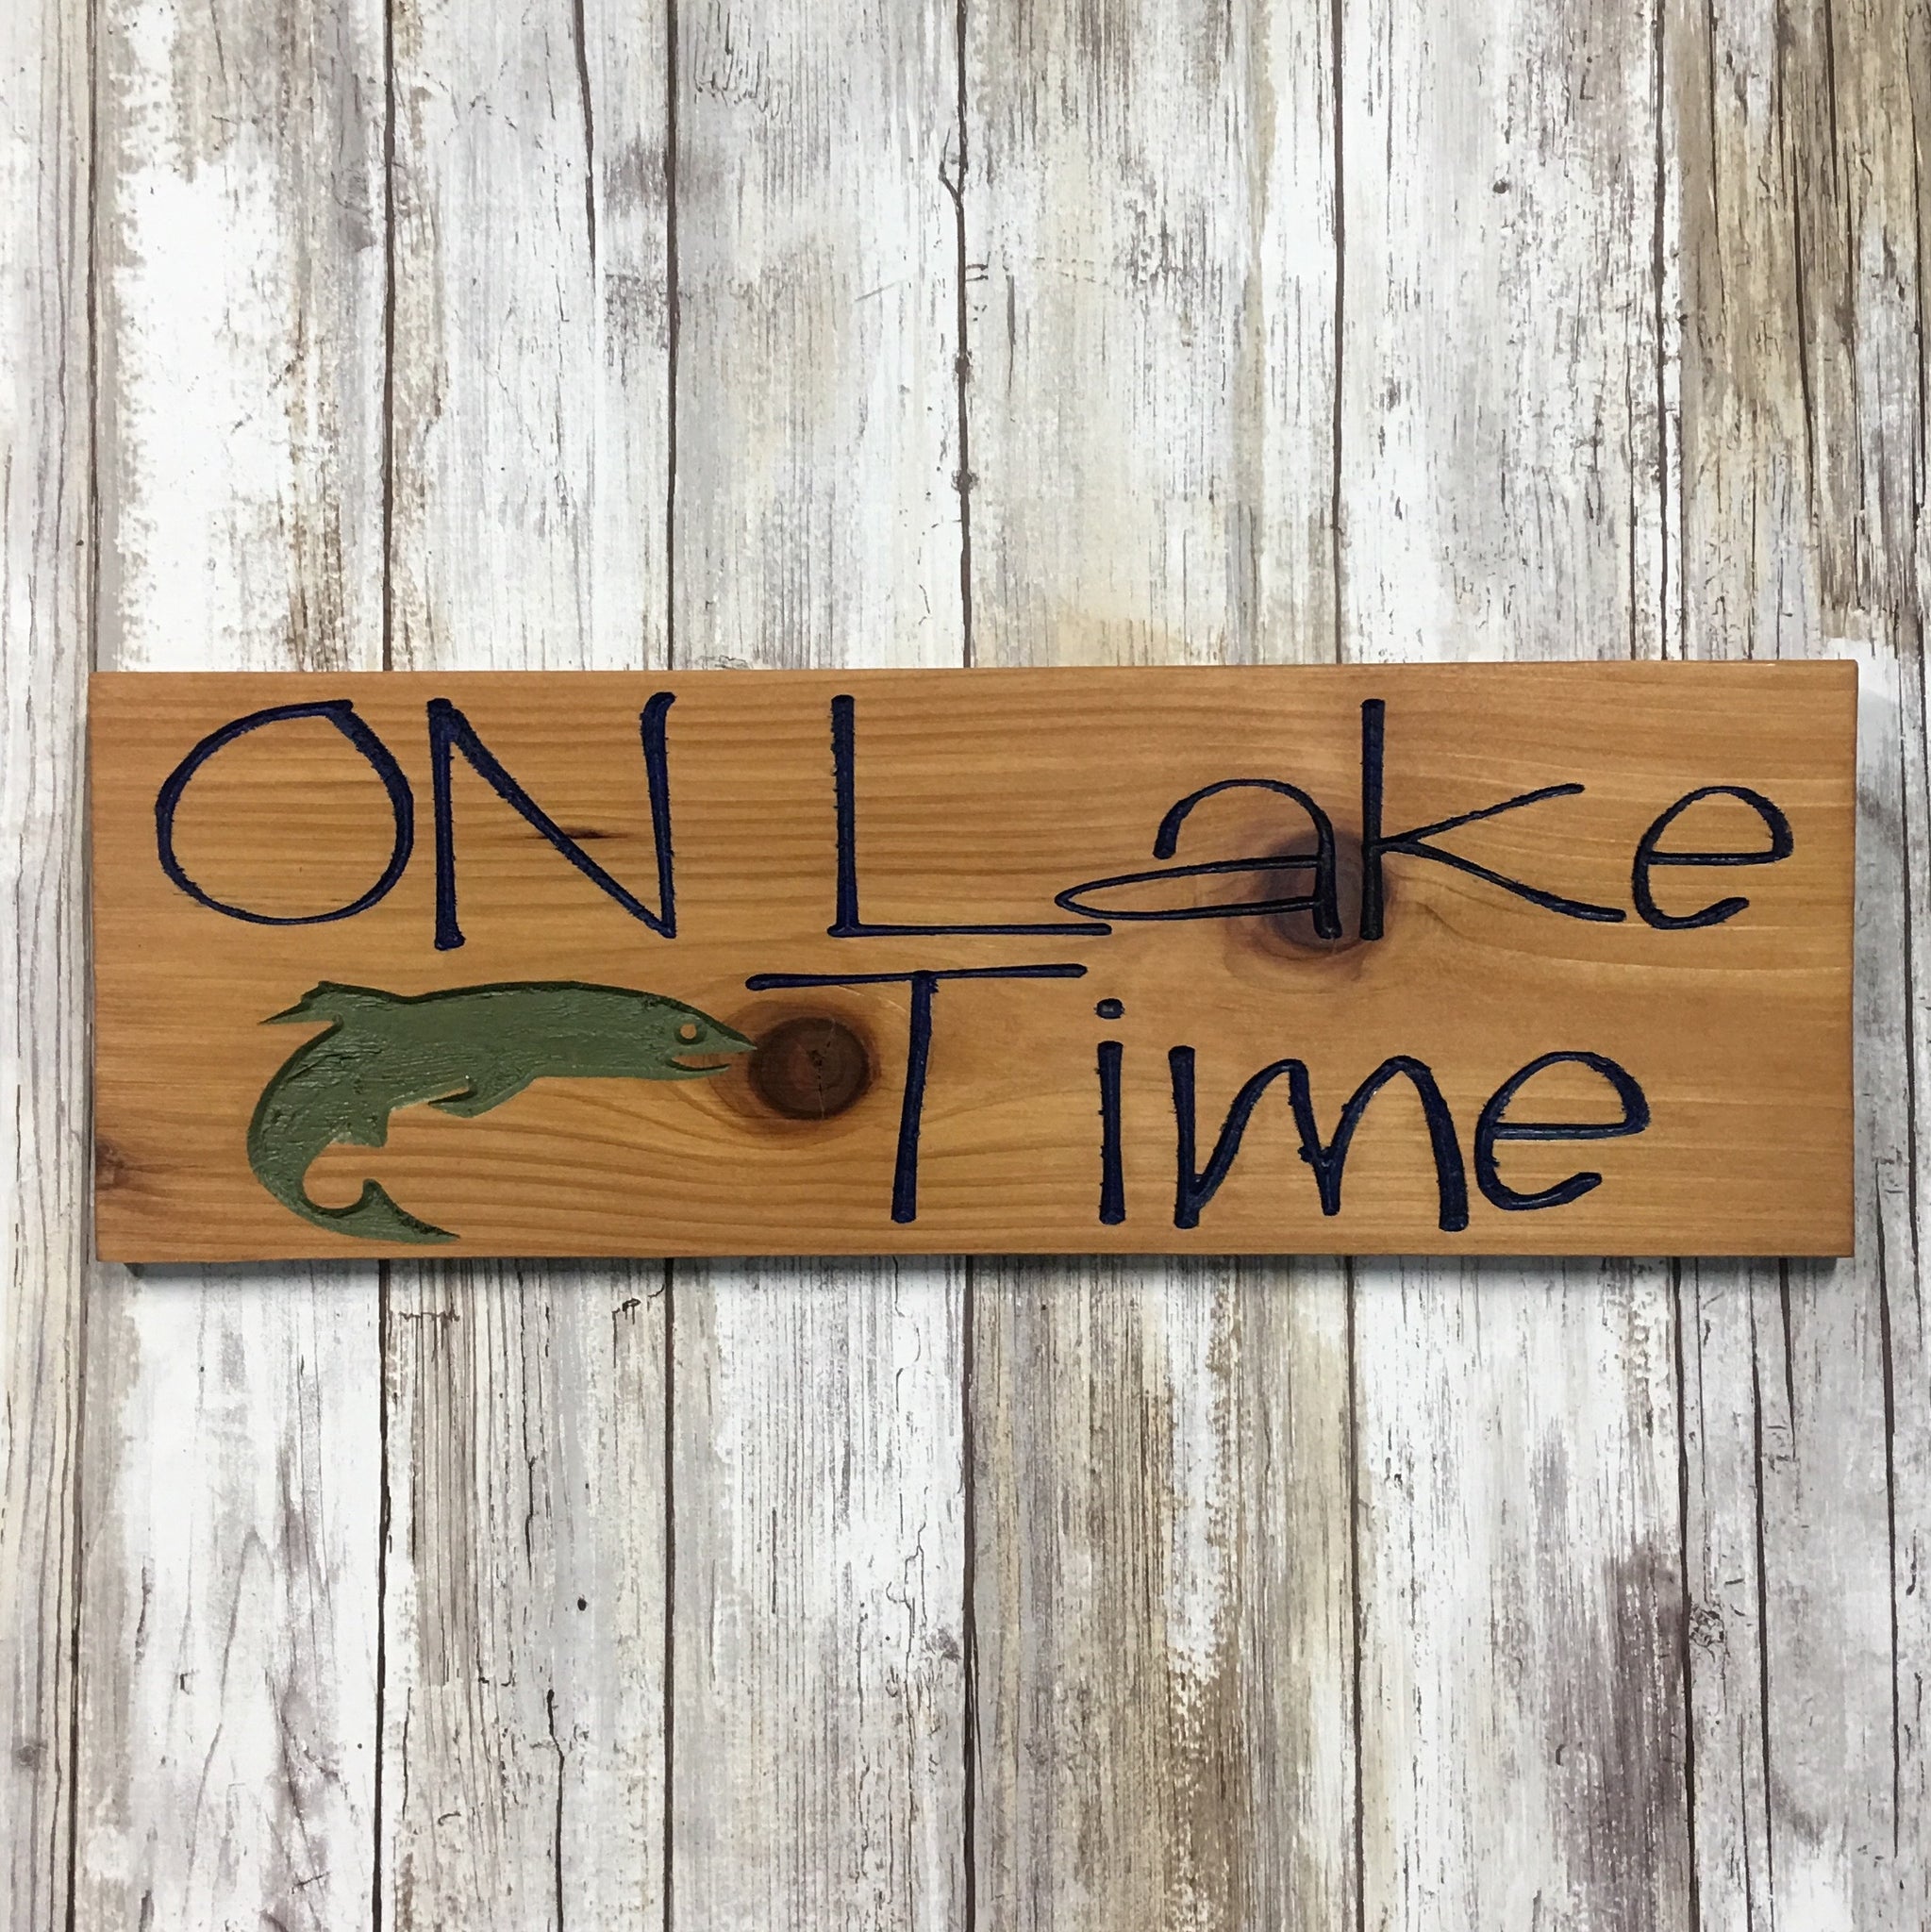 On Lake Time Rustic Wood Sign - Cabin Decor - Carved Engraved Cedar Wood